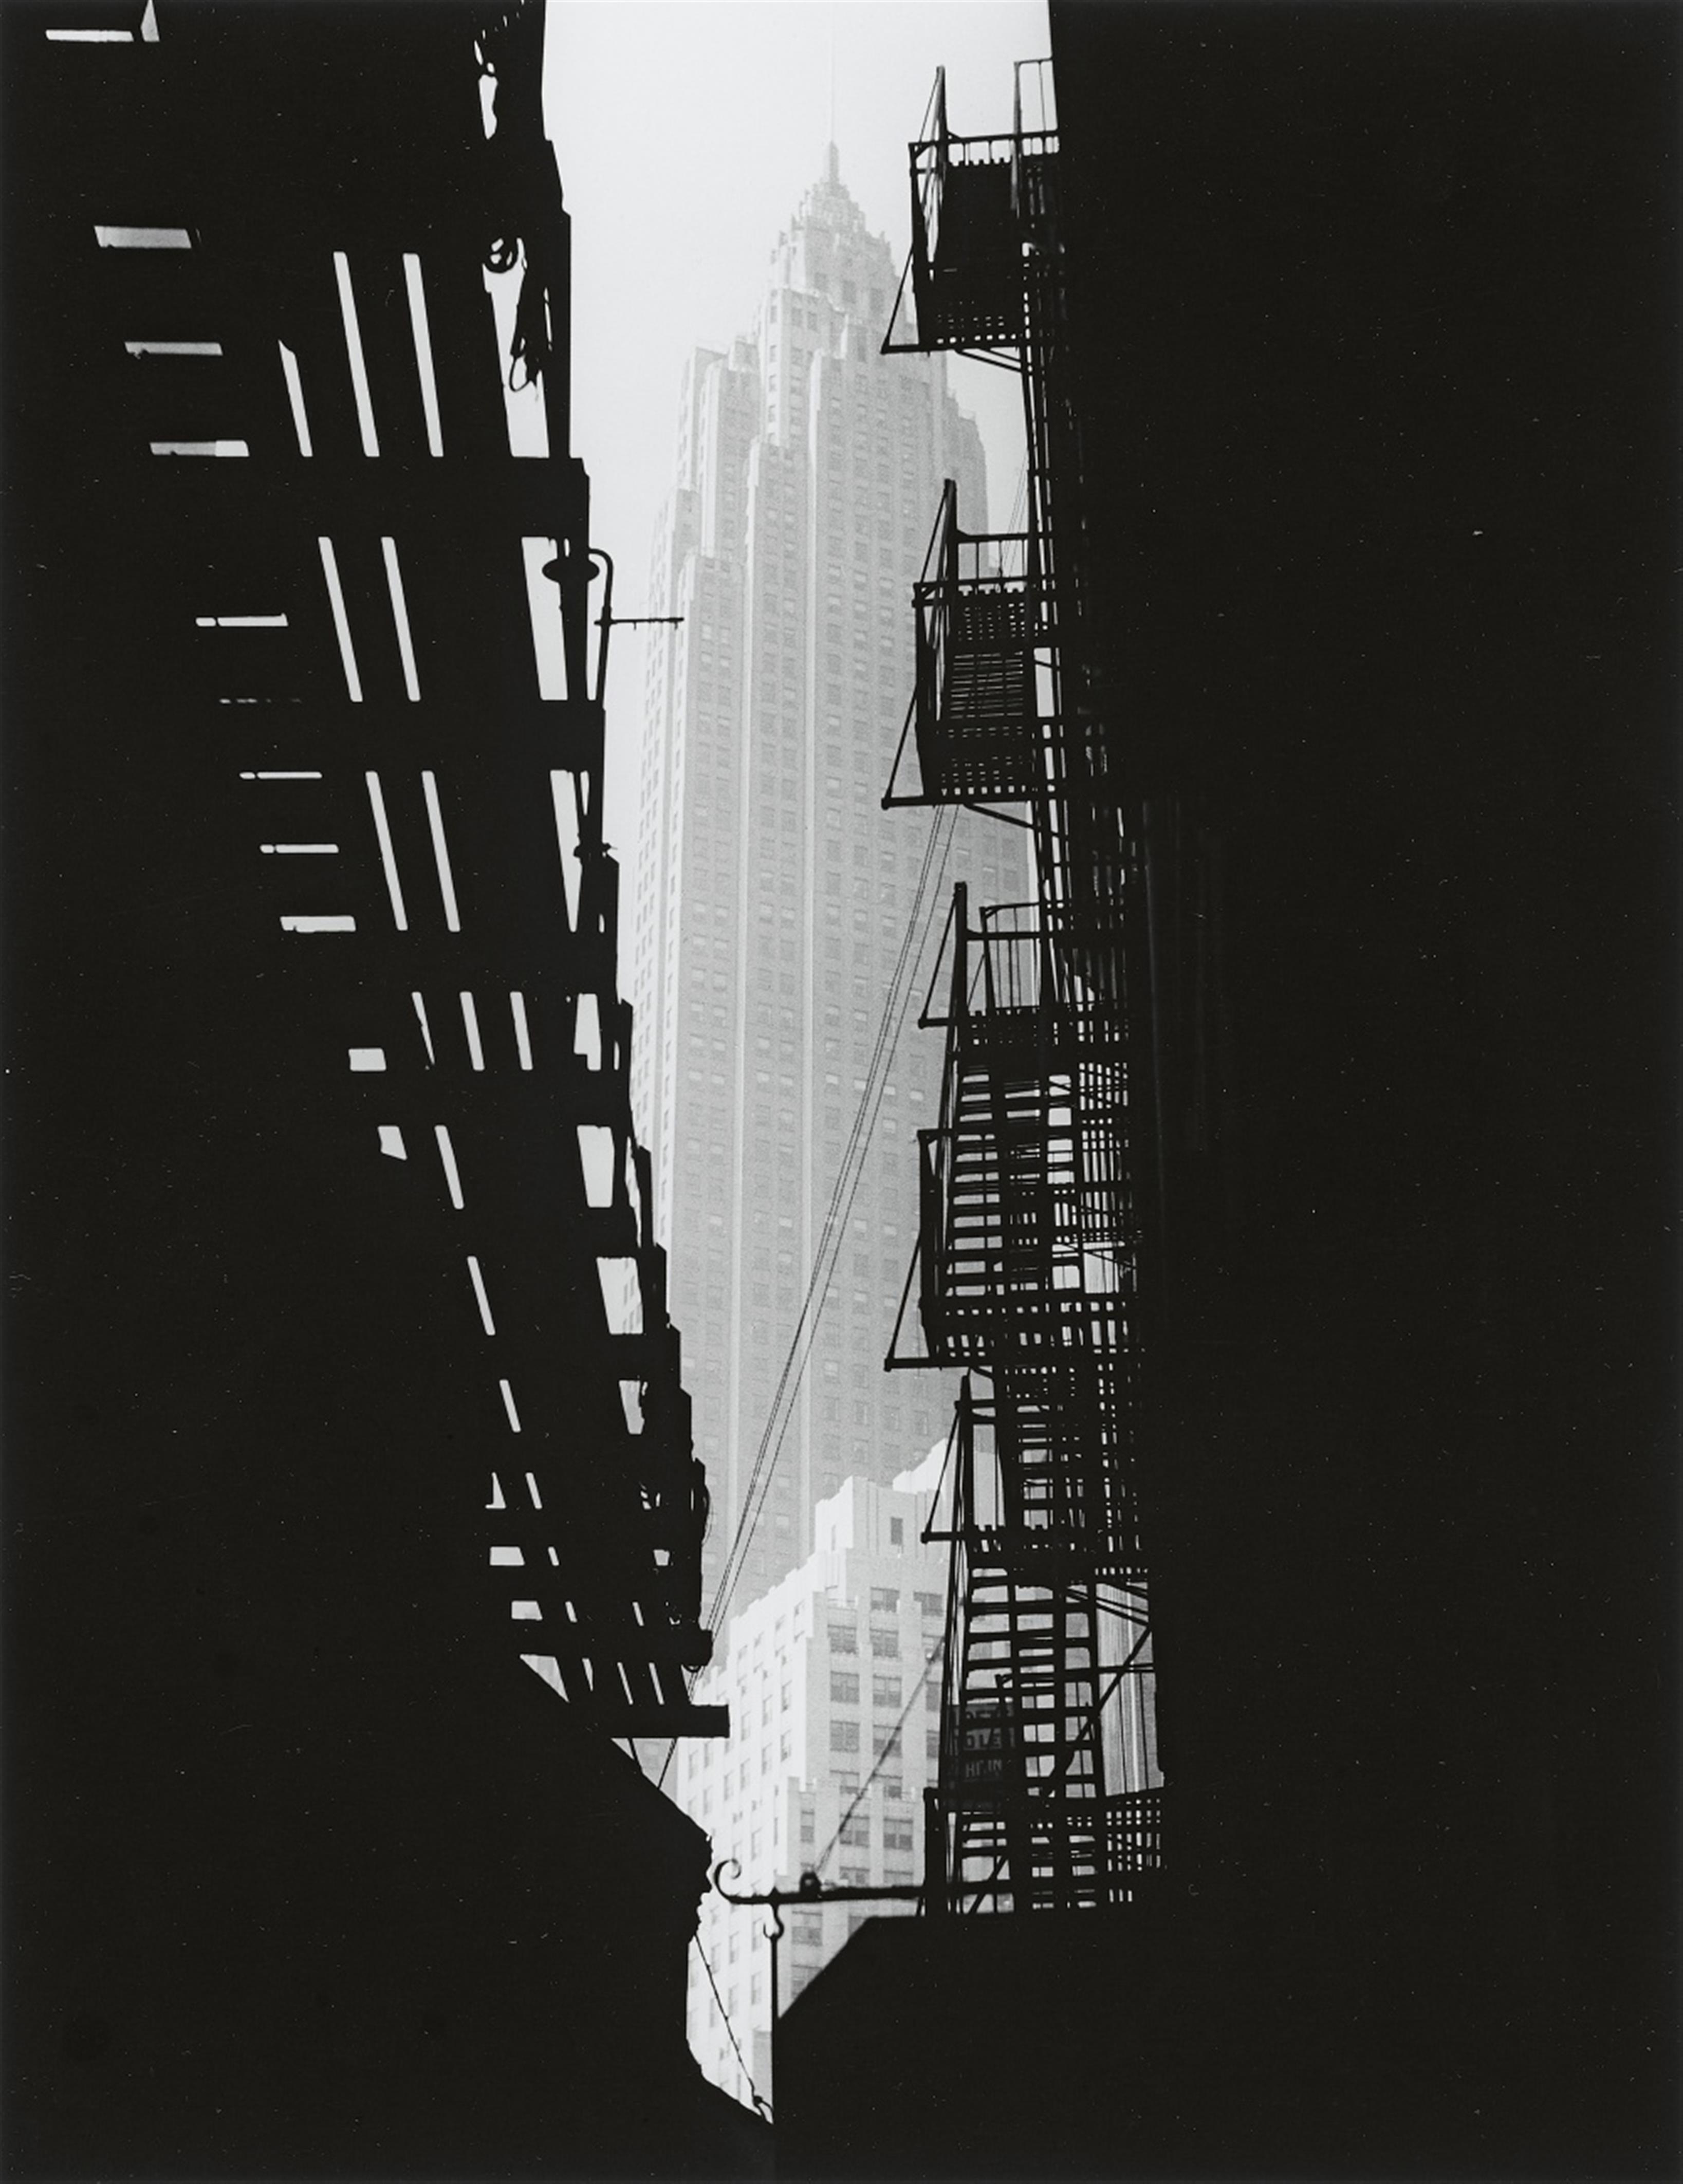 Andreas Feininger - Cities service building on Pine Street, New York - image-1